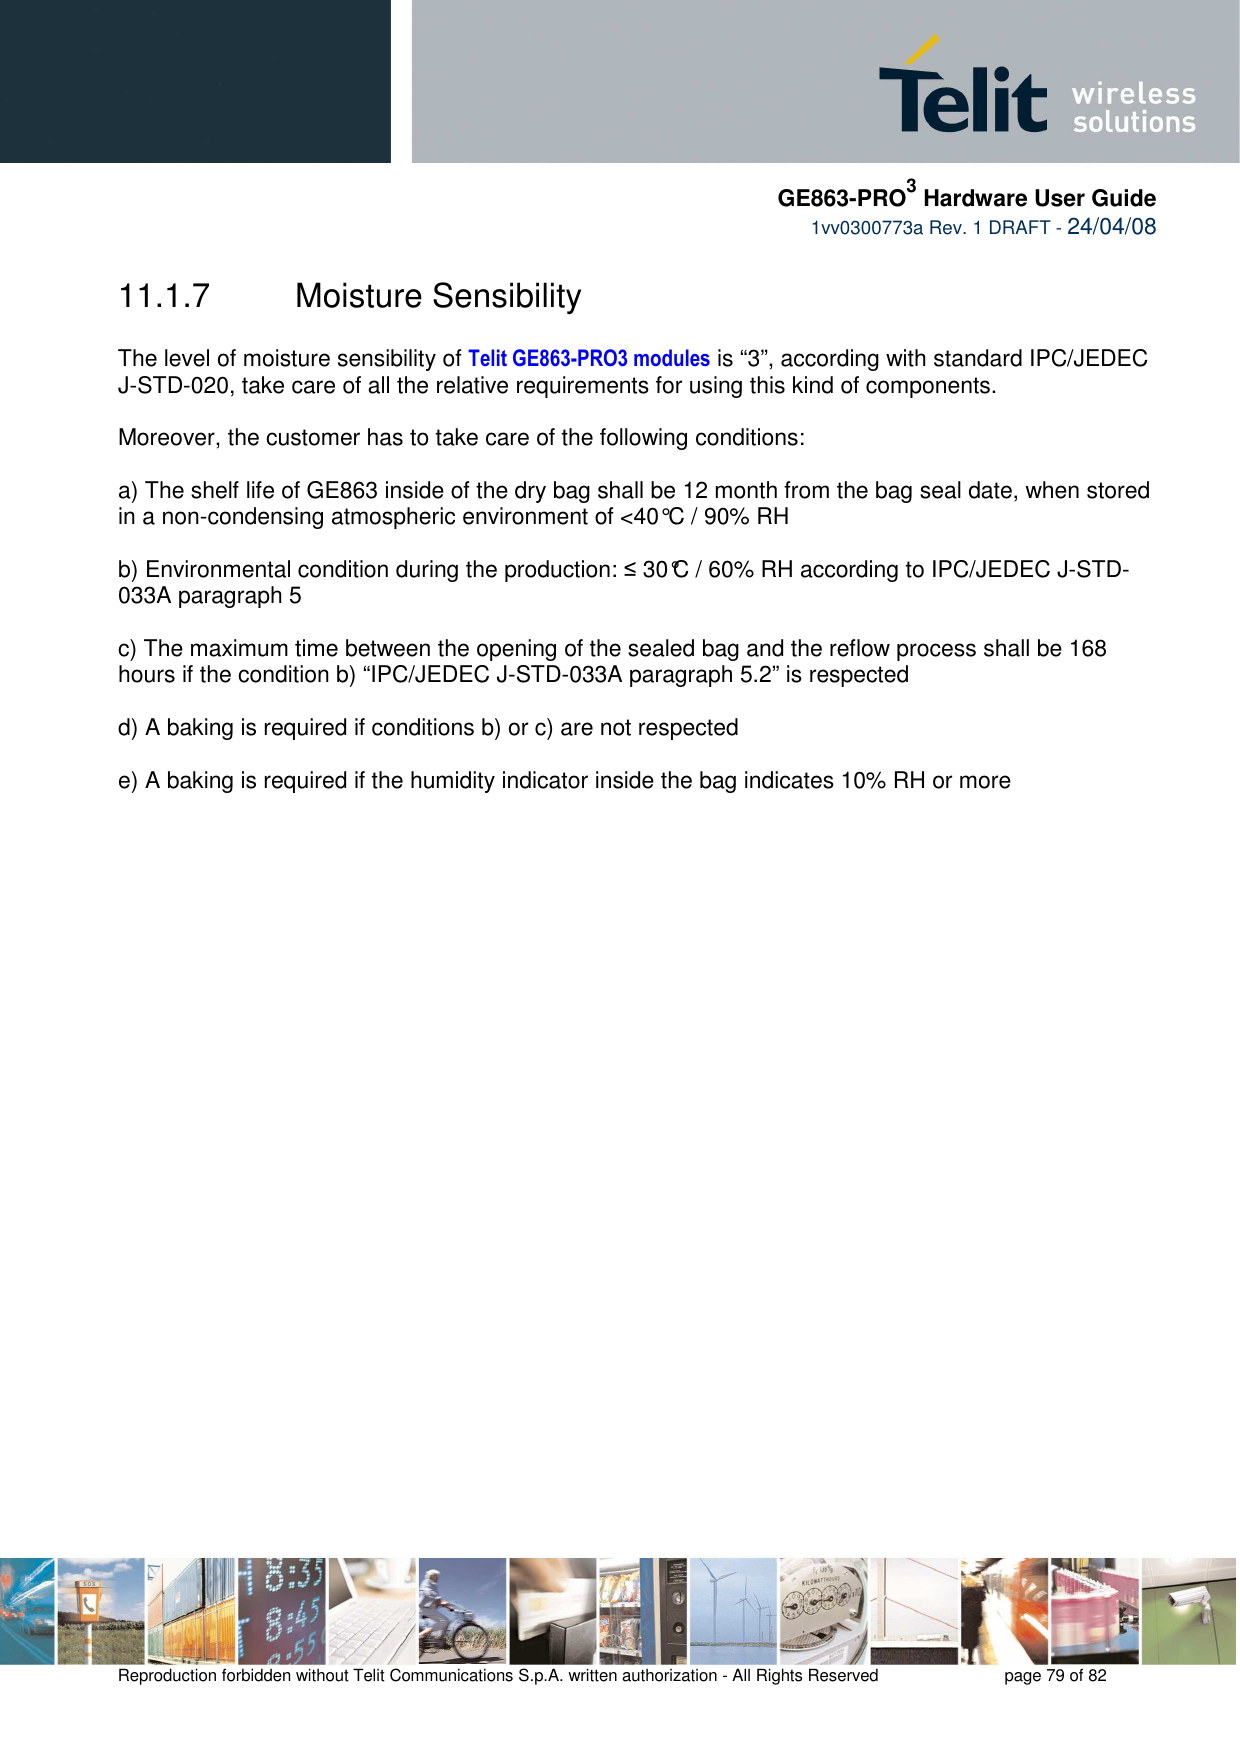     GE863-PRO3 Hardware User Guide  1vv0300773a Rev. 1 DRAFT - 24/04/08    Reproduction forbidden without Telit Communications S.p.A. written authorization - All Rights Reserved    page 79 of 82  11.1.7  Moisture Sensibility  The level of moisture sensibility of Telit GE863-PRO3 modules is “3”, according with standard IPC/JEDEC J-STD-020, take care of all the relative requirements for using this kind of components.  Moreover, the customer has to take care of the following conditions:  a) The shelf life of GE863 inside of the dry bag shall be 12 month from the bag seal date, when stored in a non-condensing atmospheric environment of &lt;40°C / 90% RH  b) Environmental condition during the production: ≤ 30°C / 60% RH according to IPC/JEDEC J-STD-033A paragraph 5  c) The maximum time between the opening of the sealed bag and the reflow process shall be 168 hours if the condition b) “IPC/JEDEC J-STD-033A paragraph 5.2” is respected  d) A baking is required if conditions b) or c) are not respected  e) A baking is required if the humidity indicator inside the bag indicates 10% RH or more   